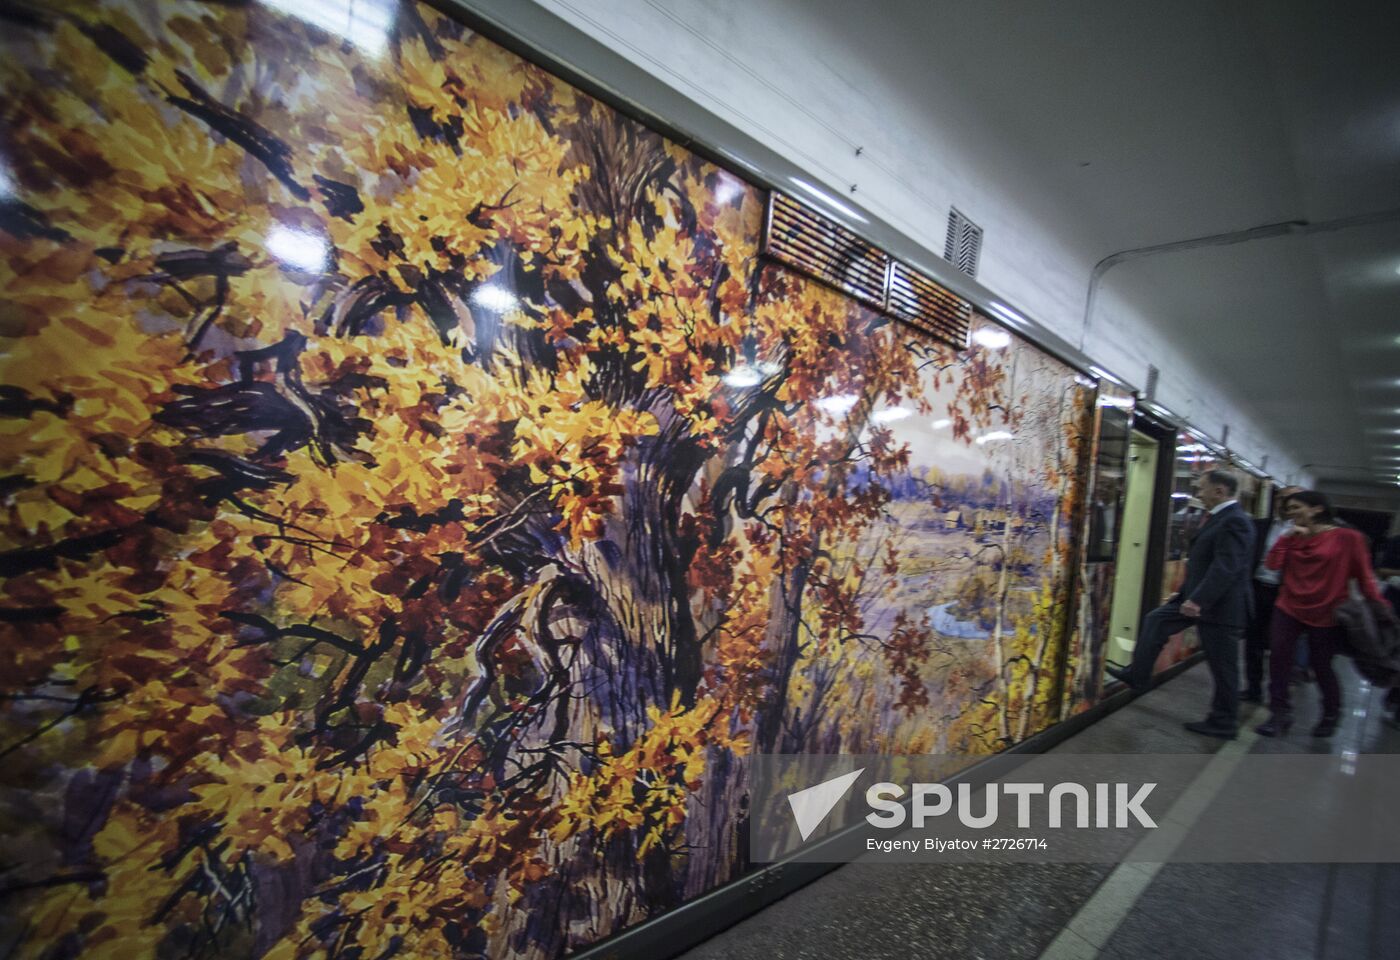 Russian Geographical Society presents exhibition on Aquarelle Moscow Metro train